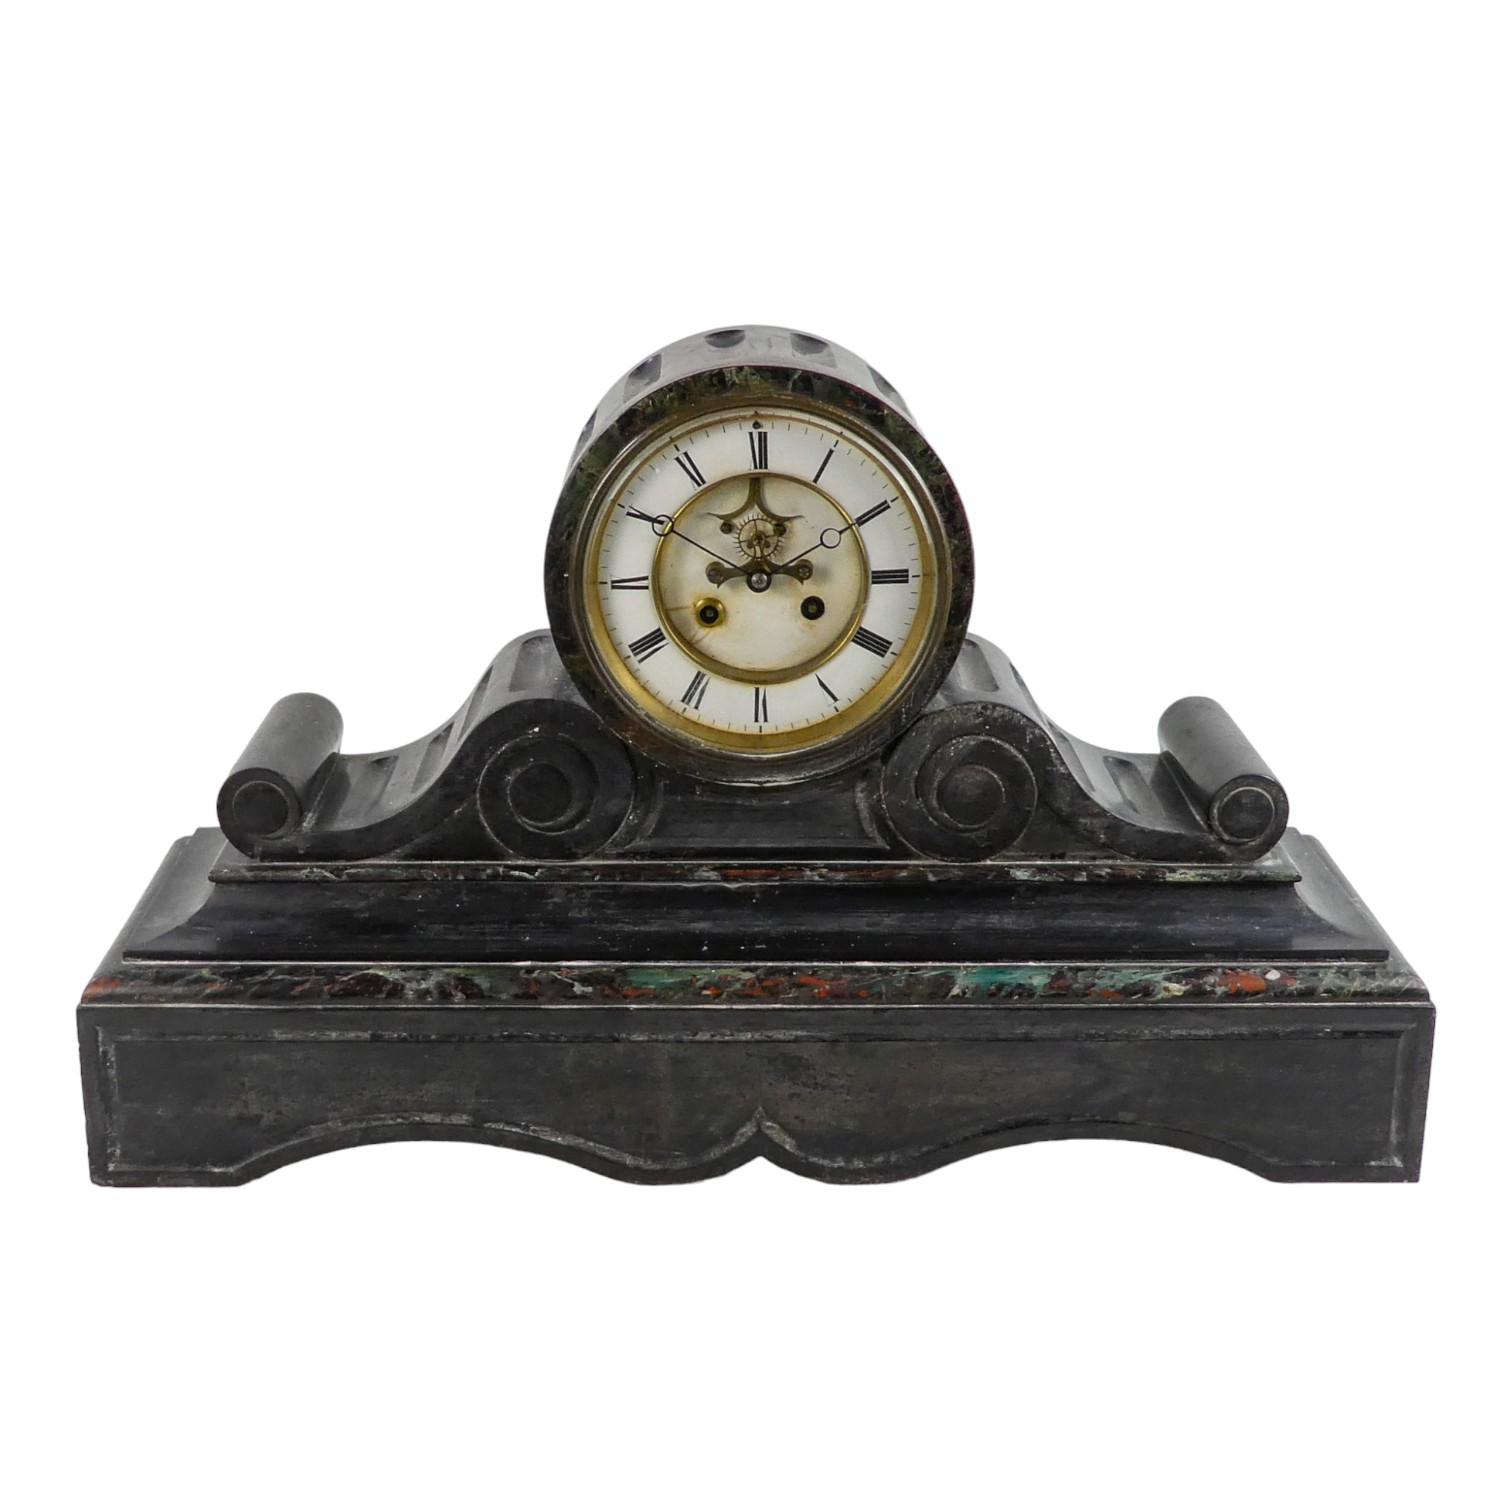 A large late 19th century slate mantel clock - with a visible escapement, the white enamel dial